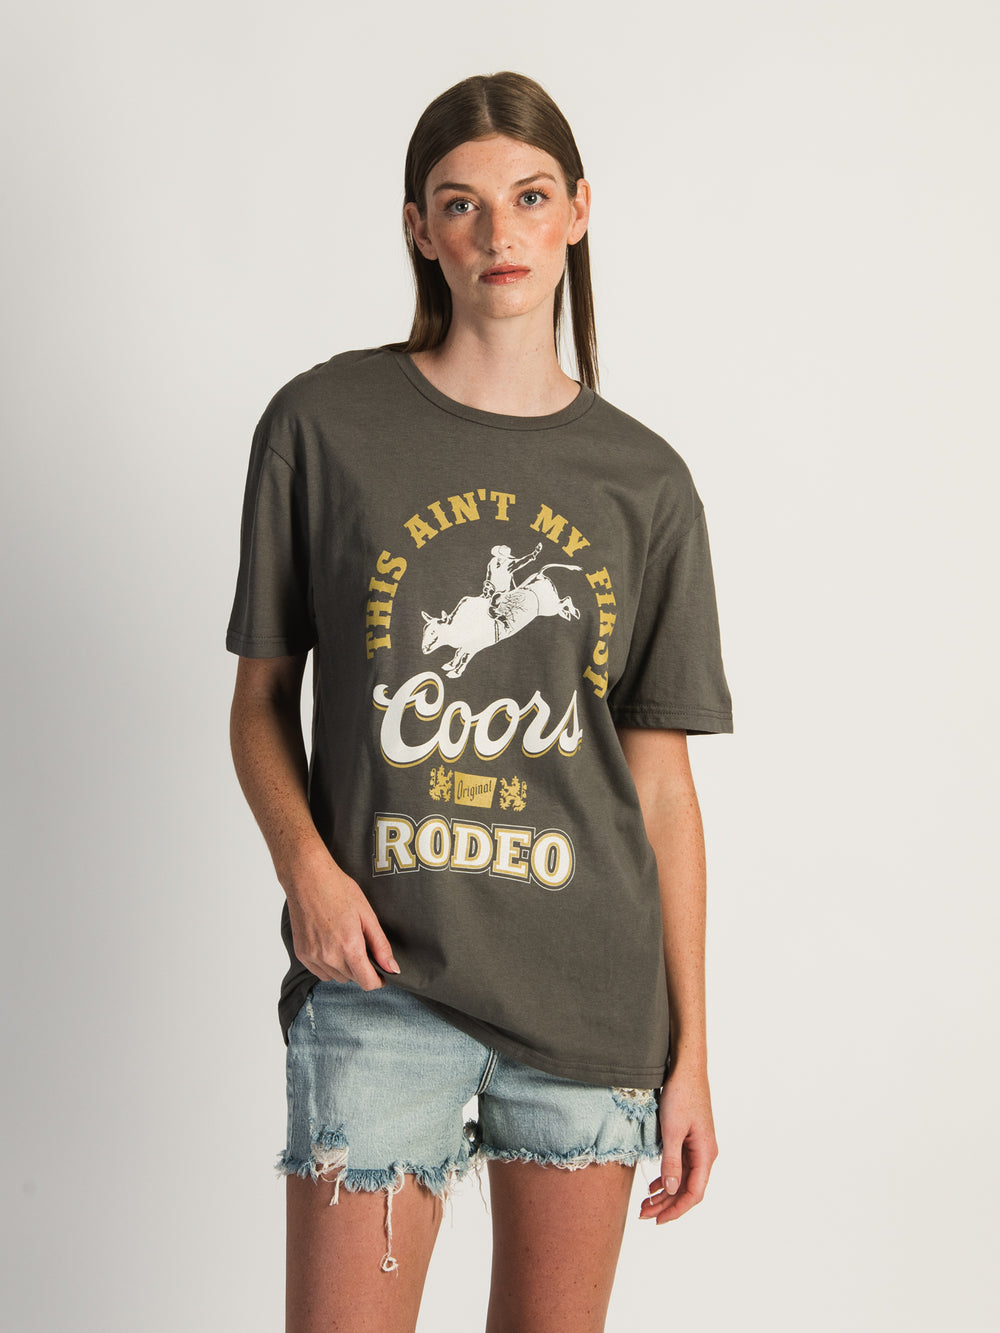 NTD APPAREL THIS AIN'T MY 1ST RODEO TEE